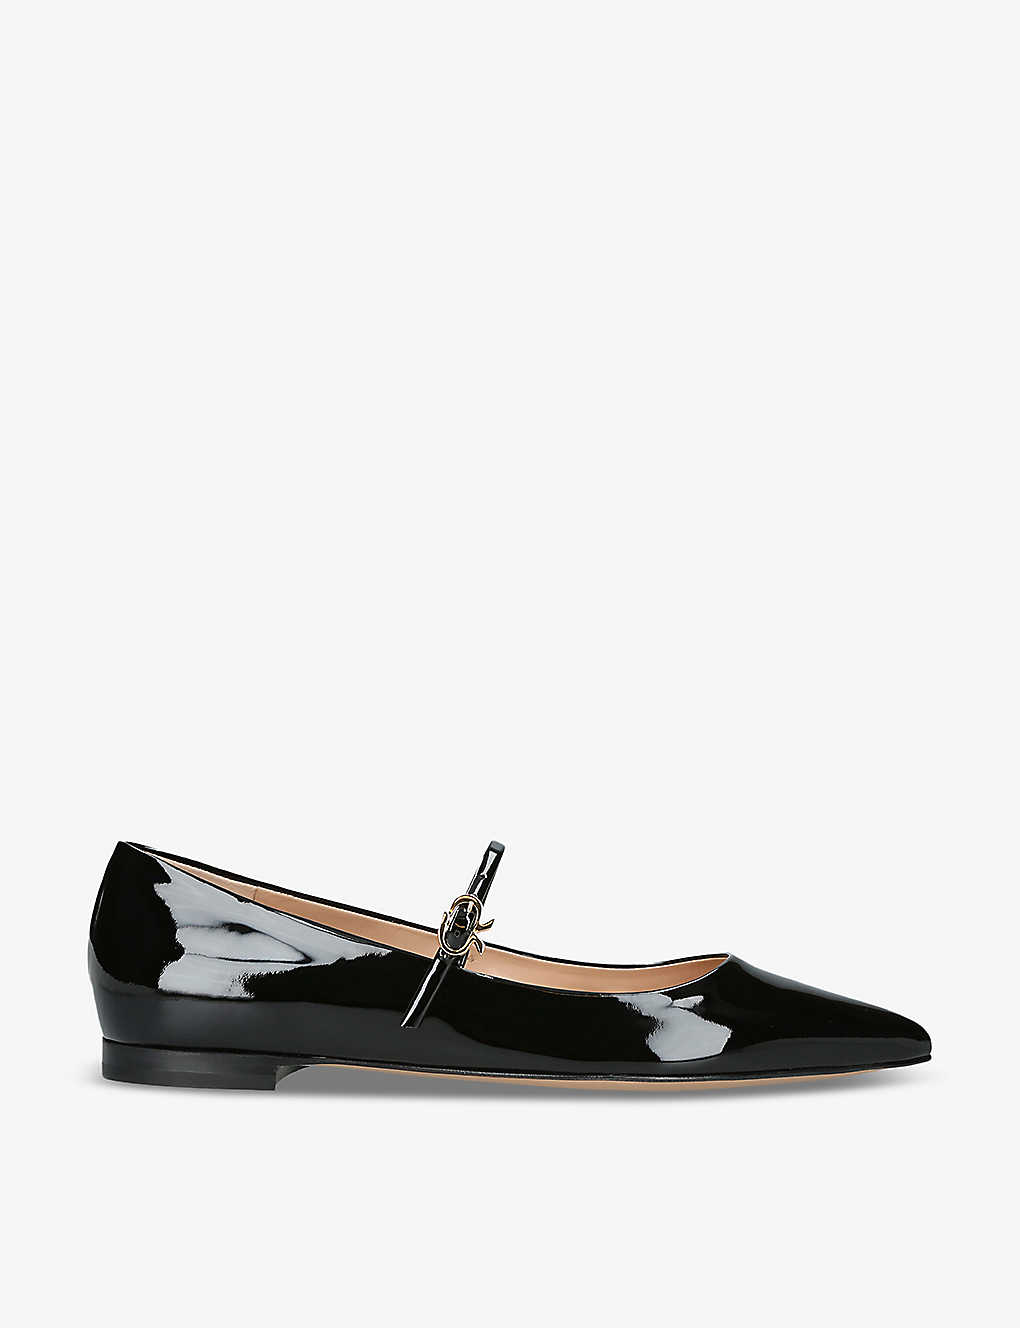 Shop Gianvito Rossi Women's Black Vernice Buckle-embellished Patent-leather Pumps